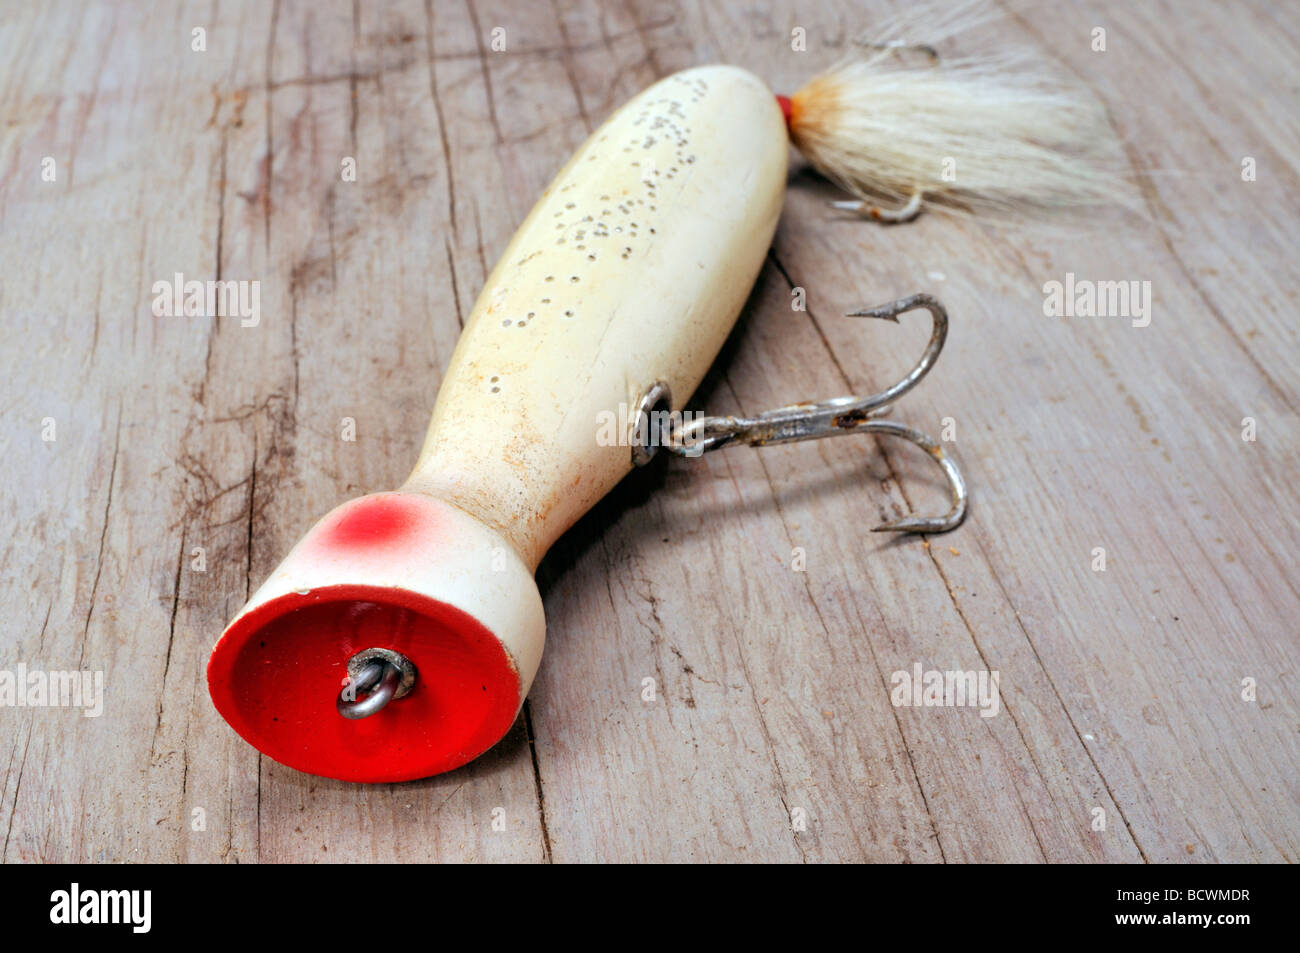 Salt water fishing lure on wood a plug or popper type lure Stock